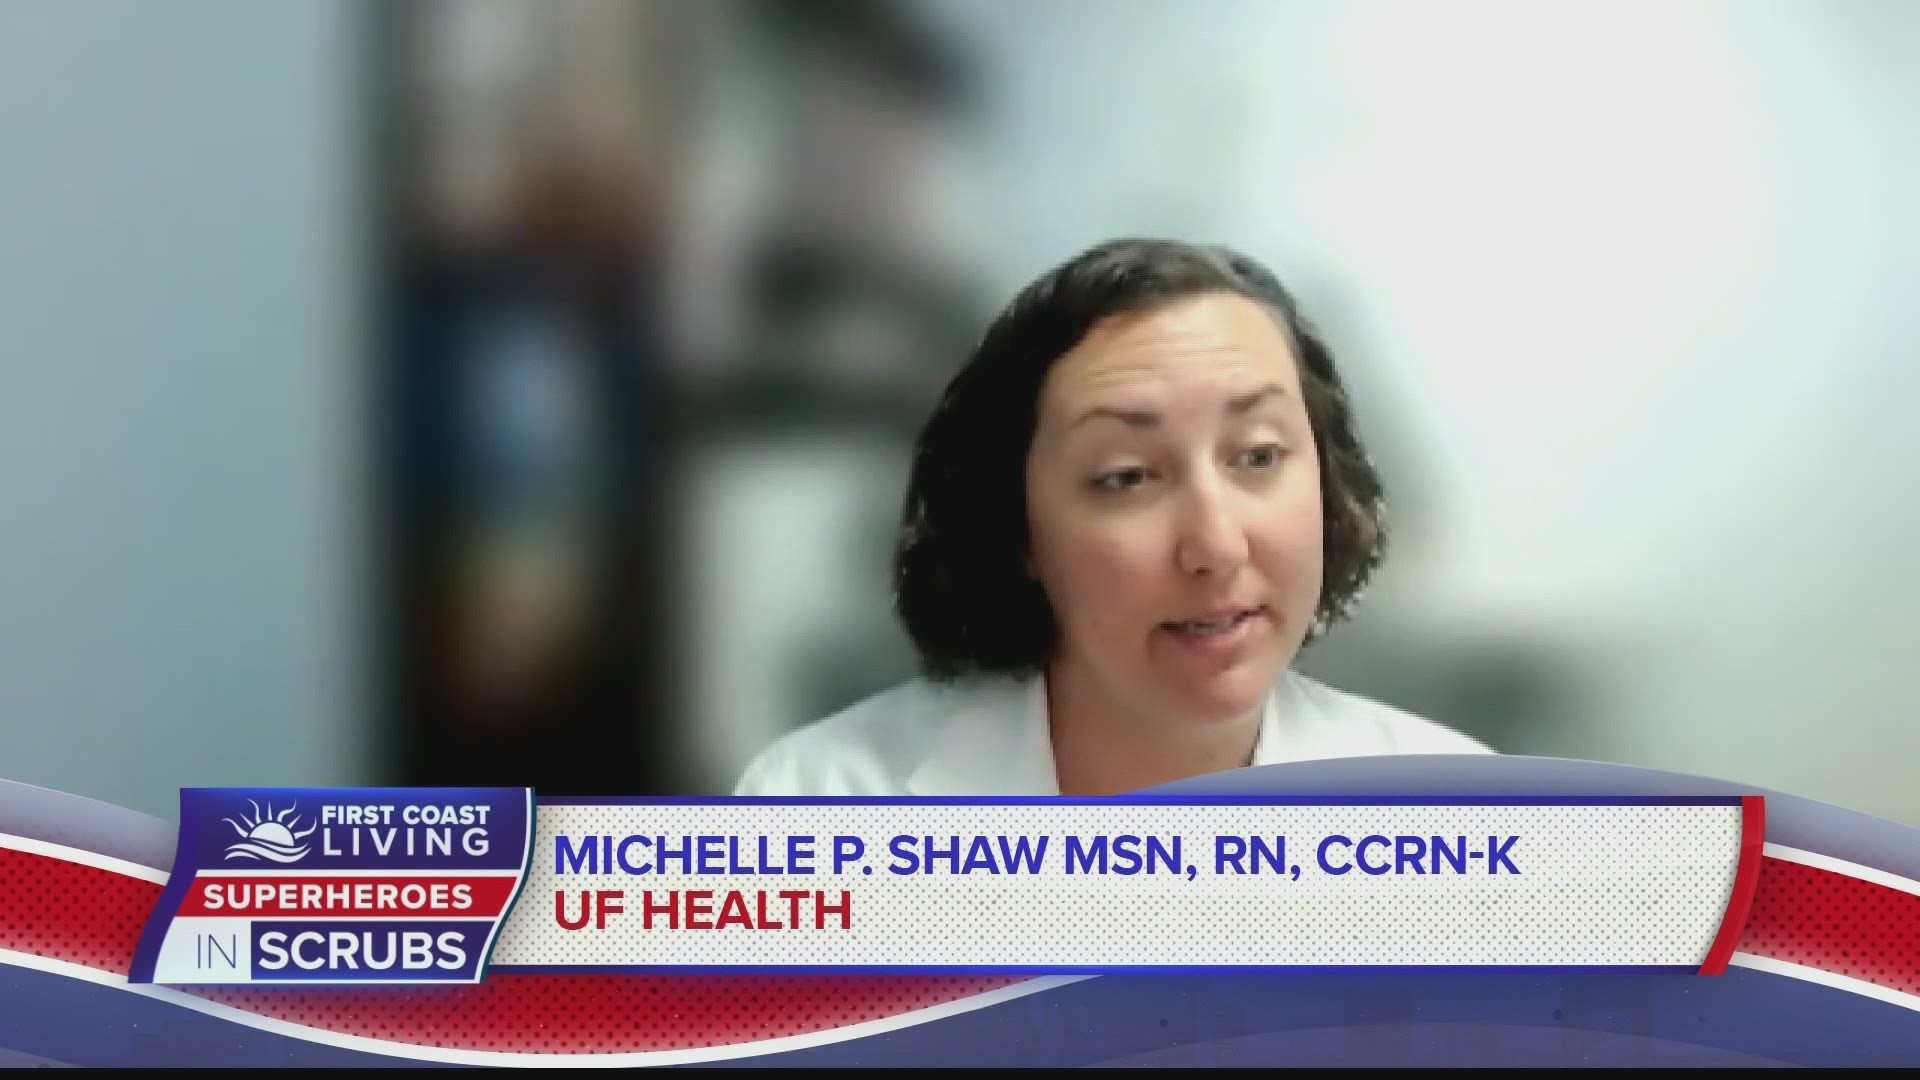 Michelle Shaw is a clinical education specialist who says the nurses at the bedside are the real superheroes.